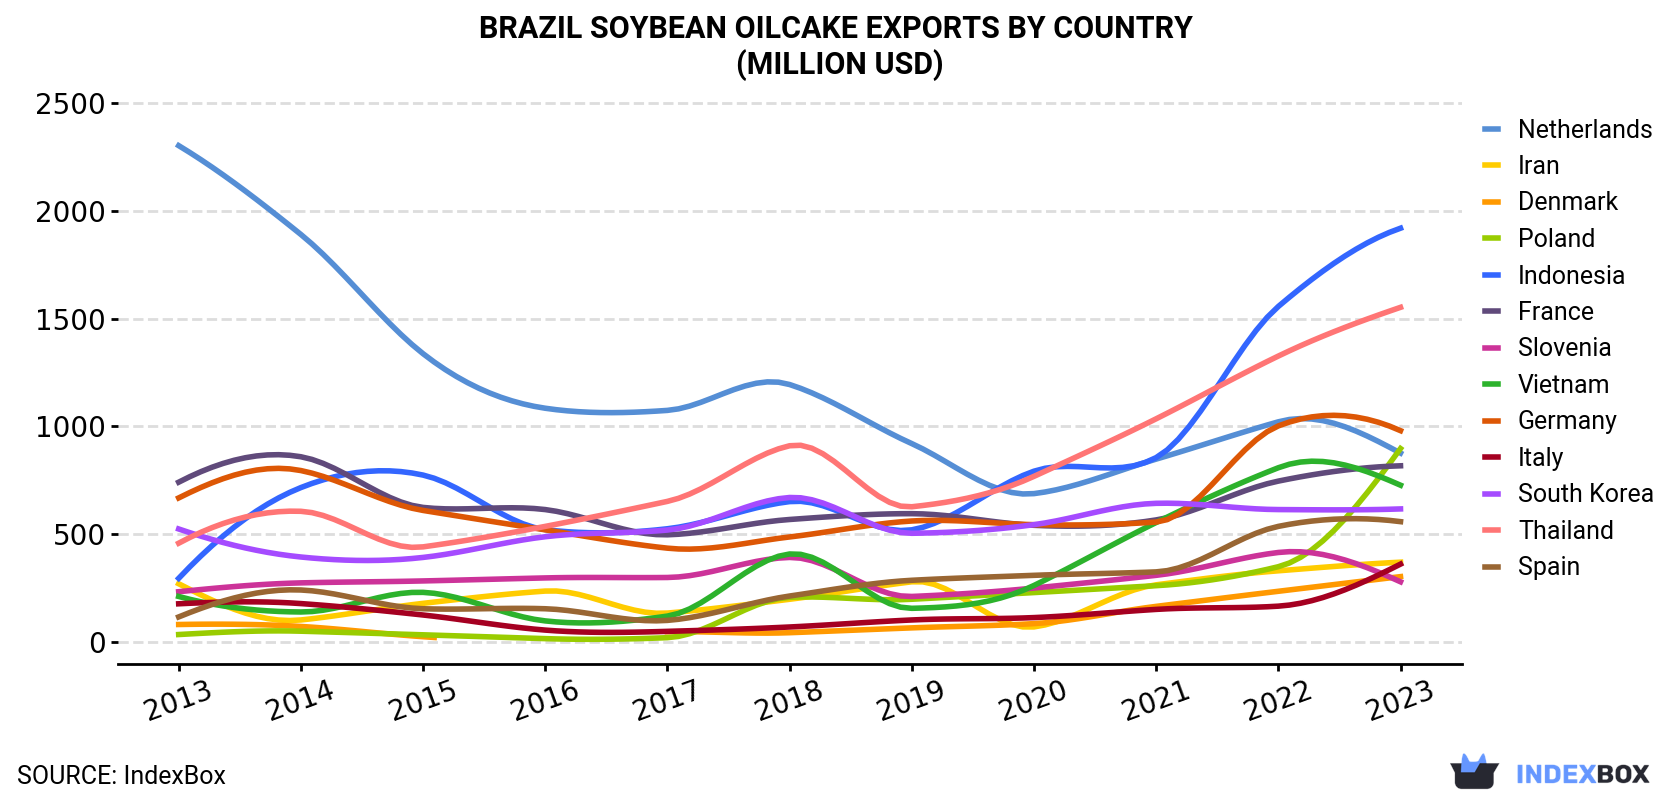 Brazil Soybean Oilcake Exports By Country (Million USD)